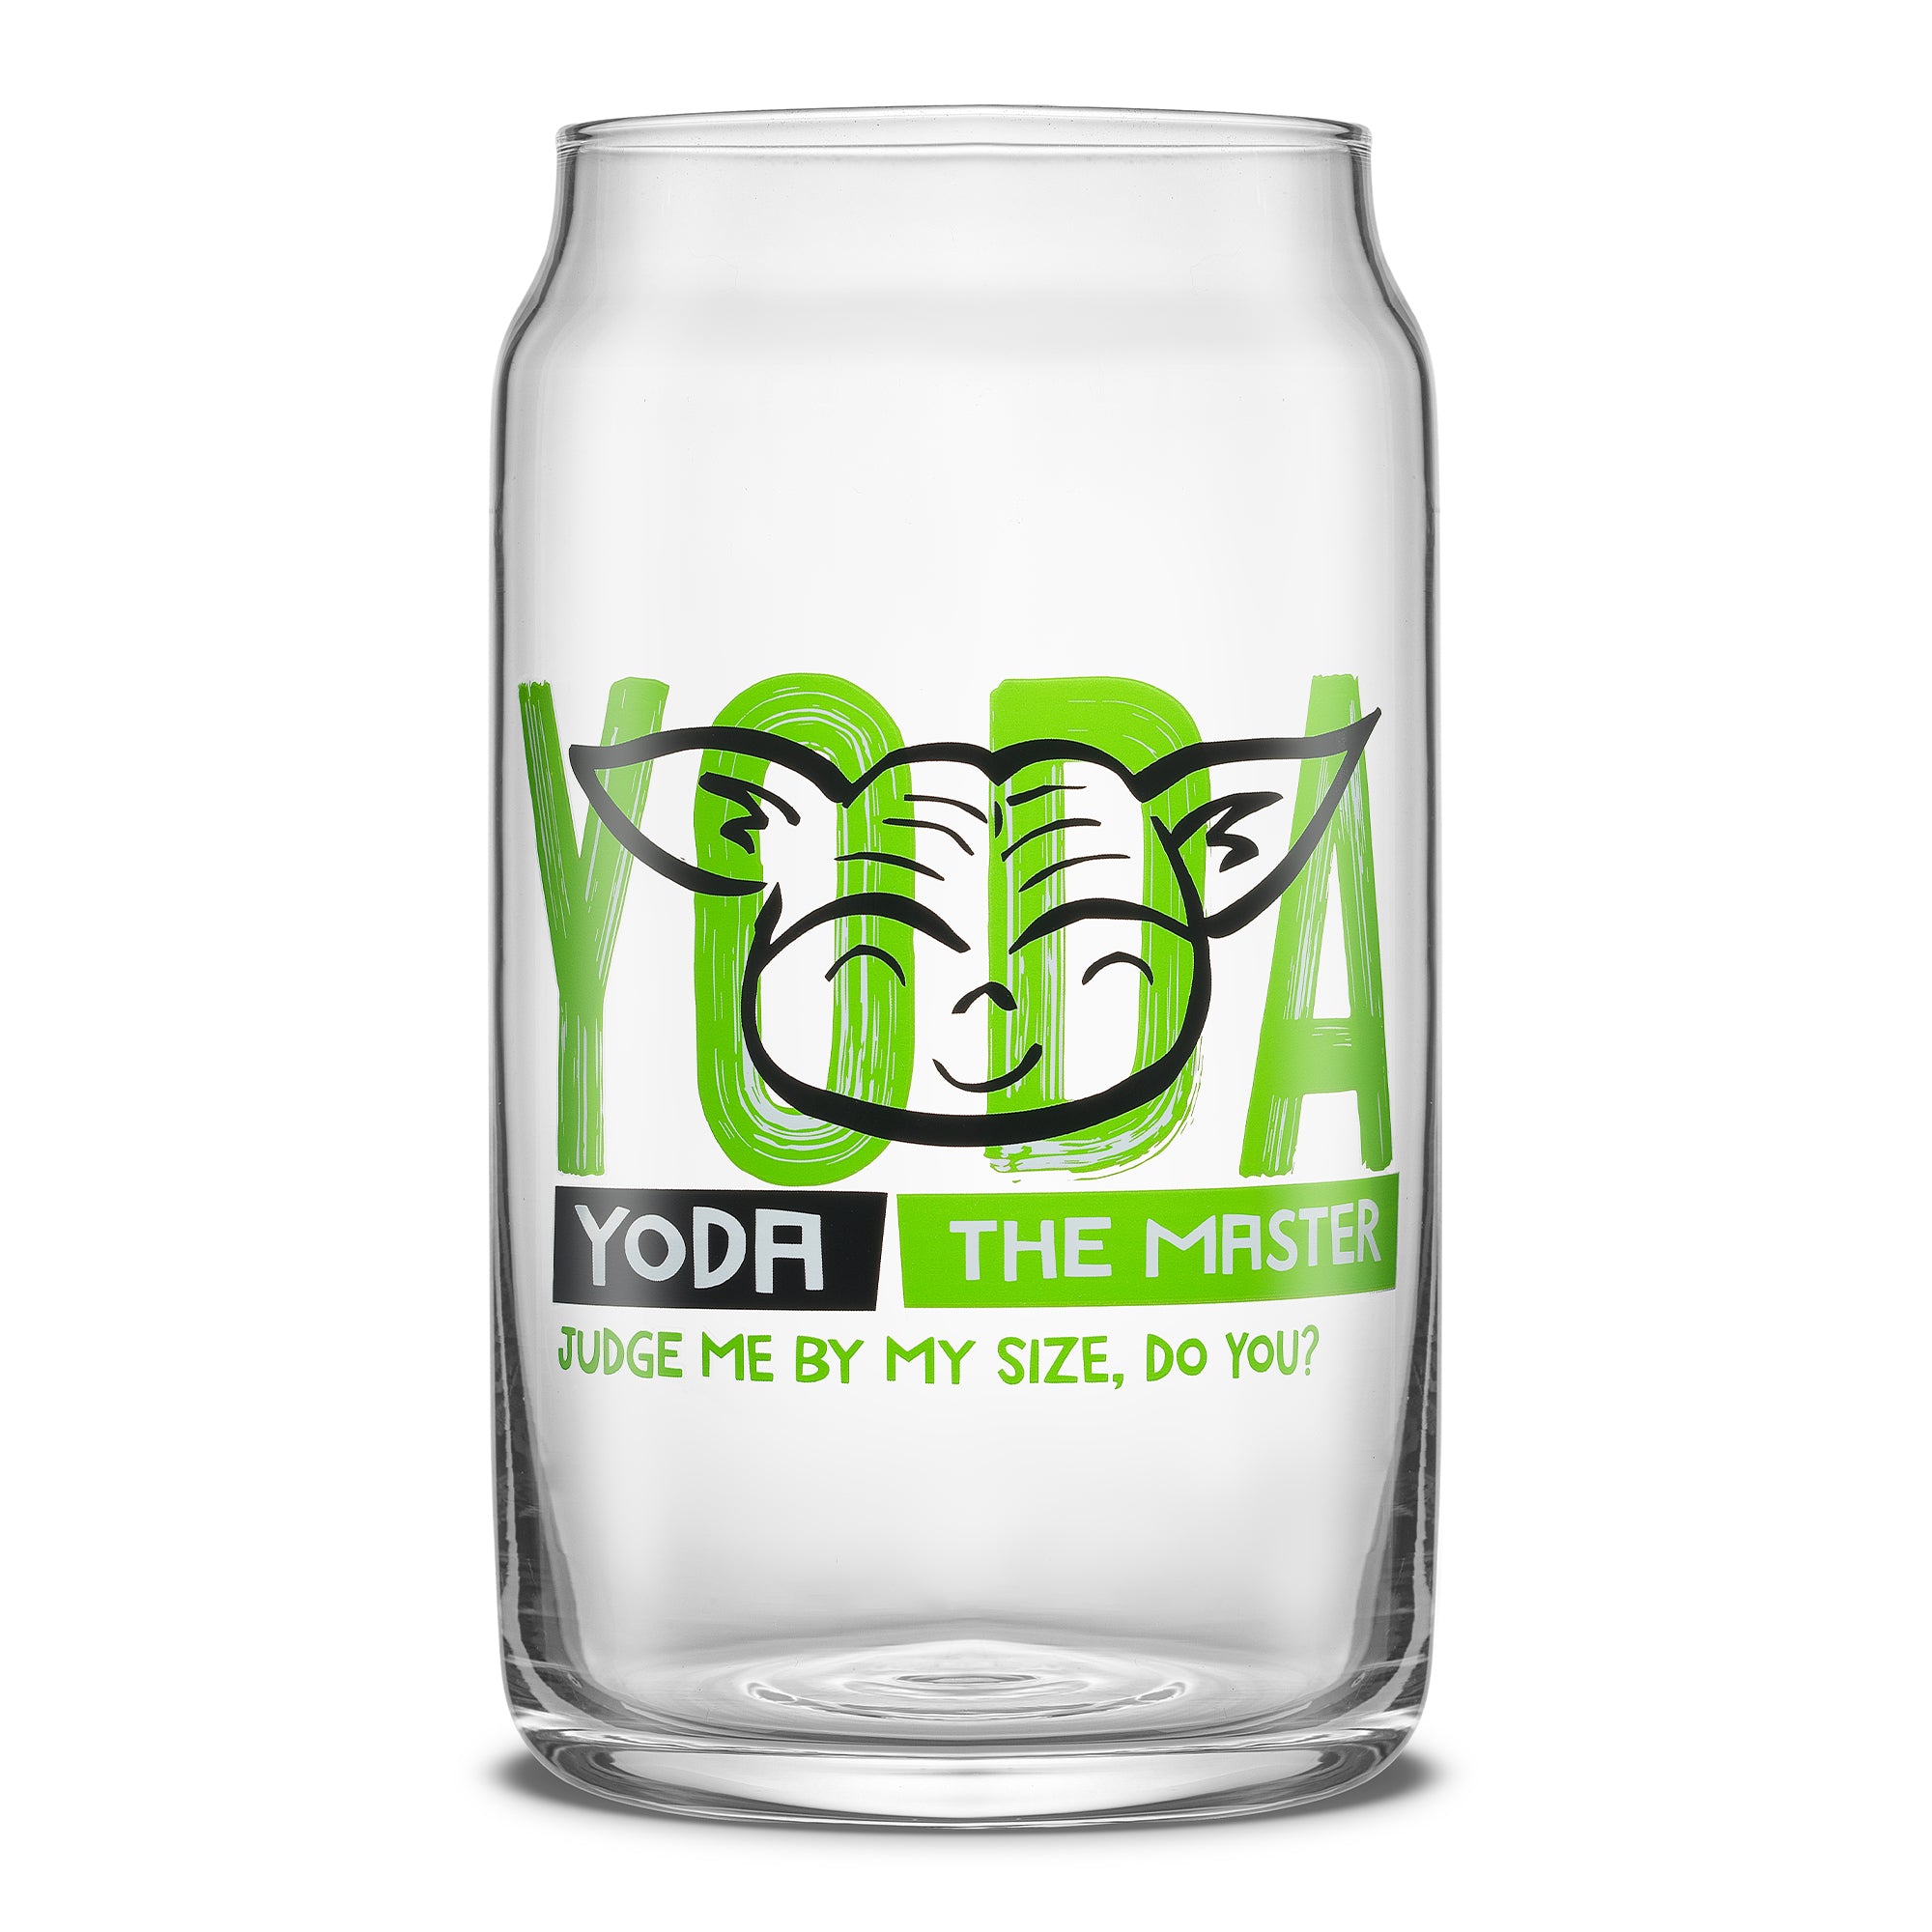 JoyJolt's Star Wars 'Now Playing' glass tumbler set, a must-have addition to any fan's drinkware collection. Featuring Yoda.